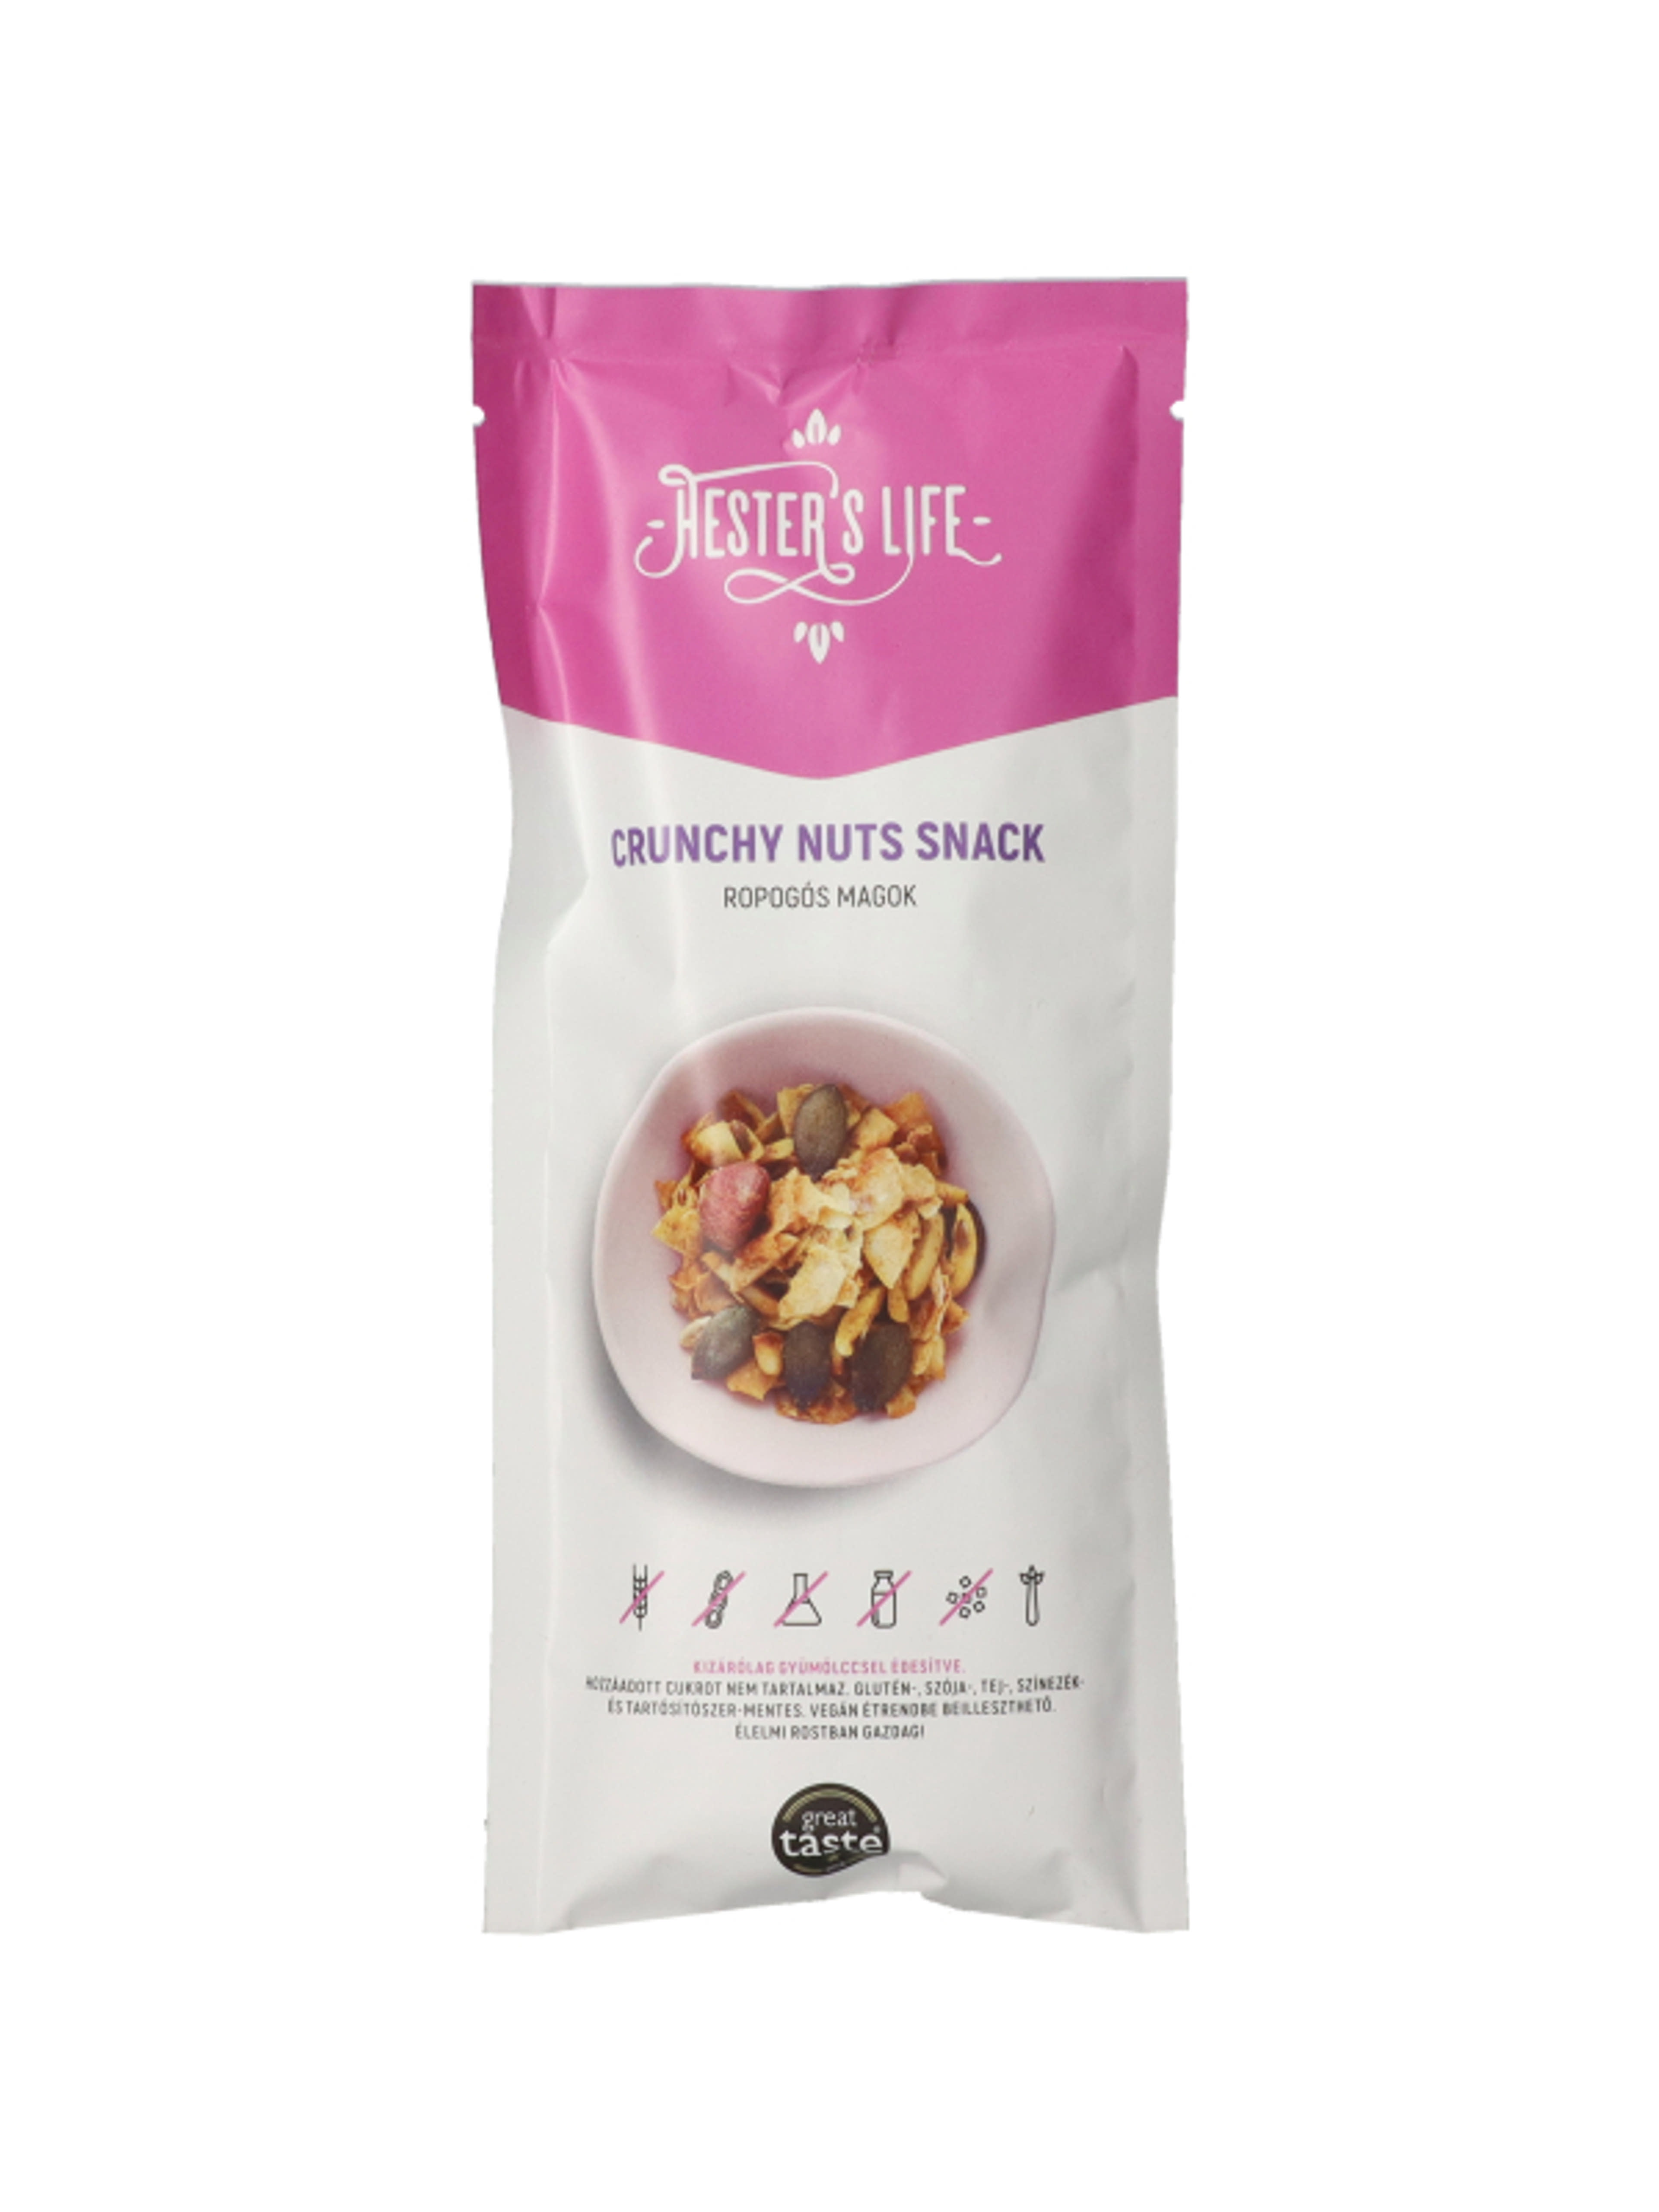 Hesters life crunchy nuts snack - 60 g-1